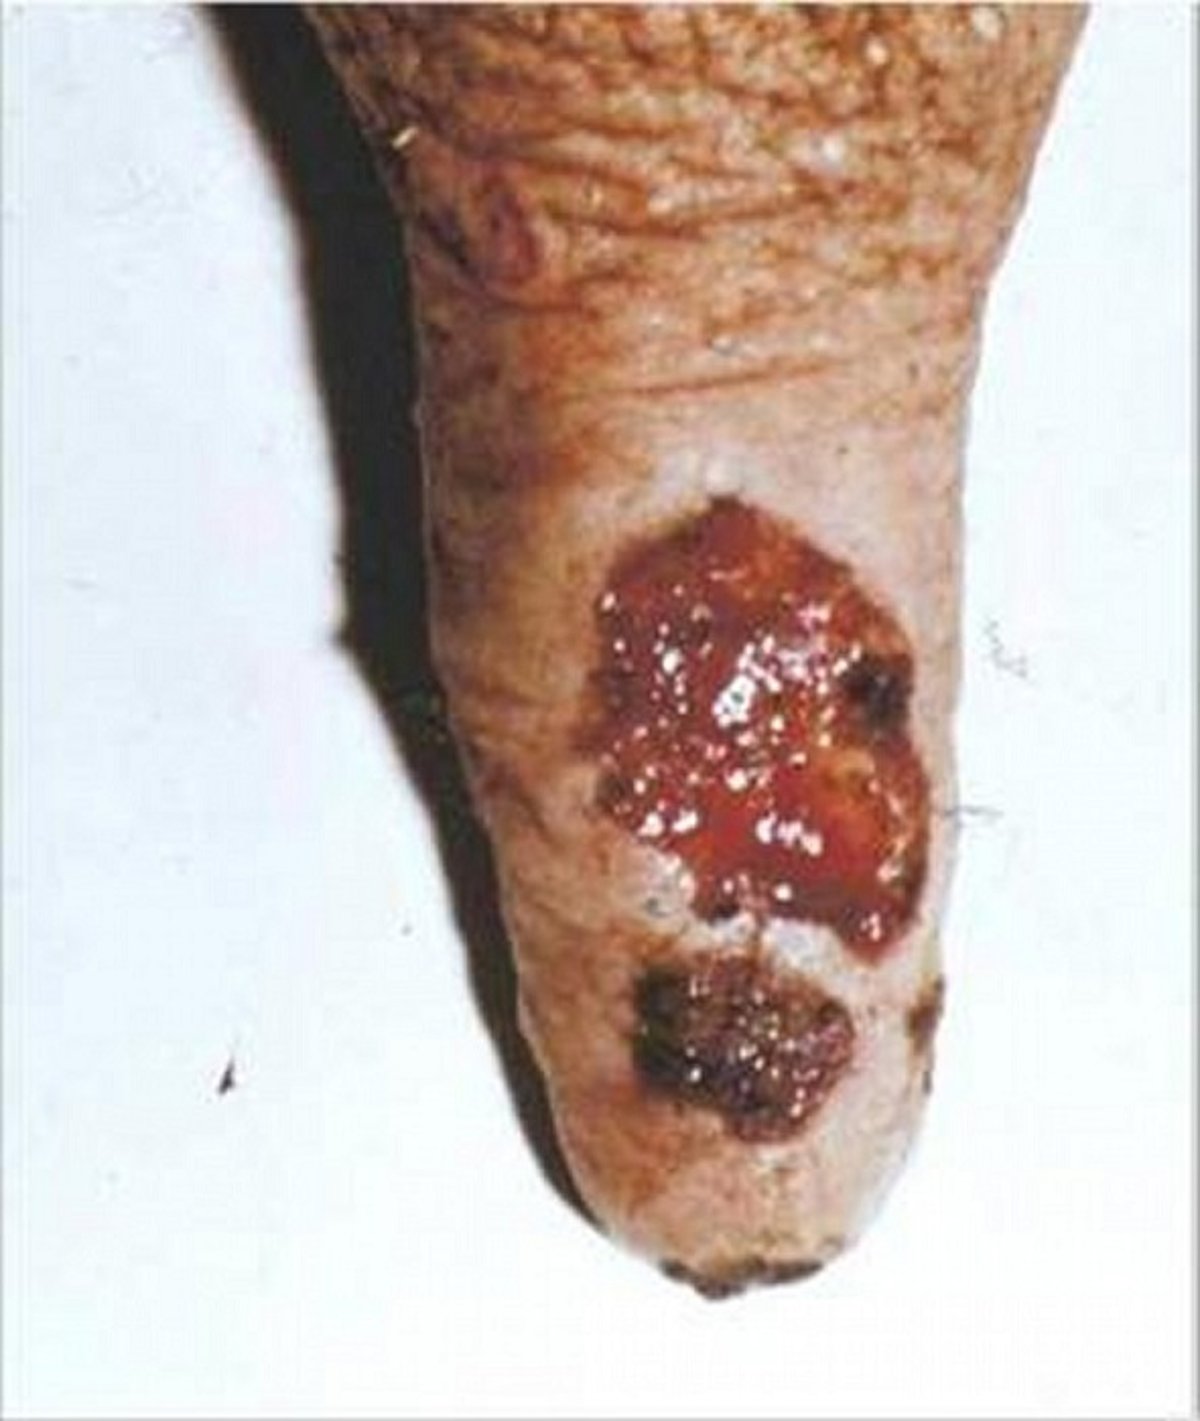 Cowpox ulcer on teat, cow